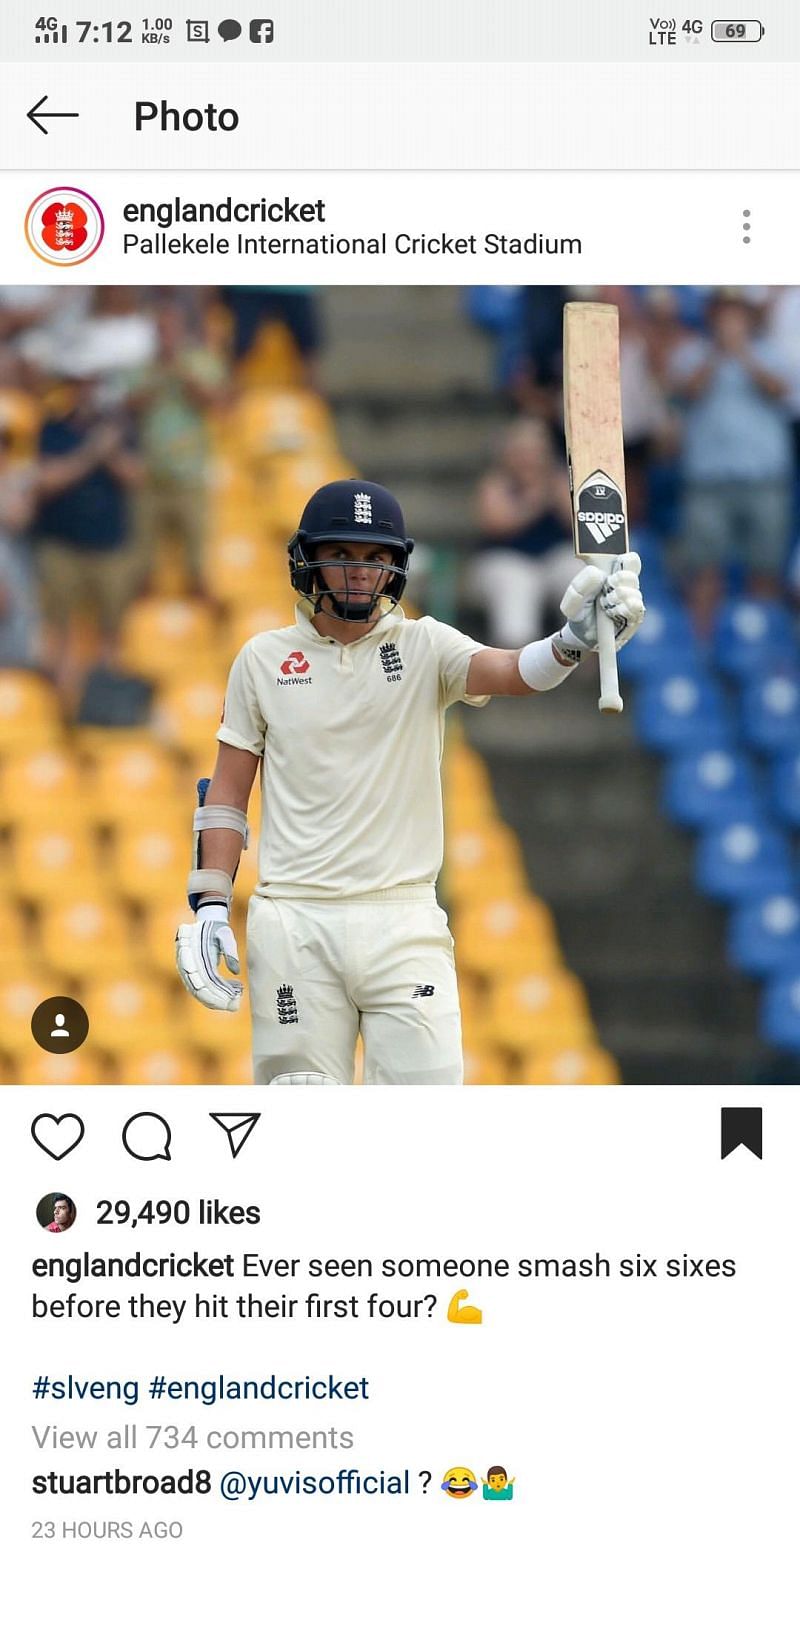 &Acirc;&nbsp;This saucy comment by Stuart Broad has received over 5.1k likes and 600+ replies till now.